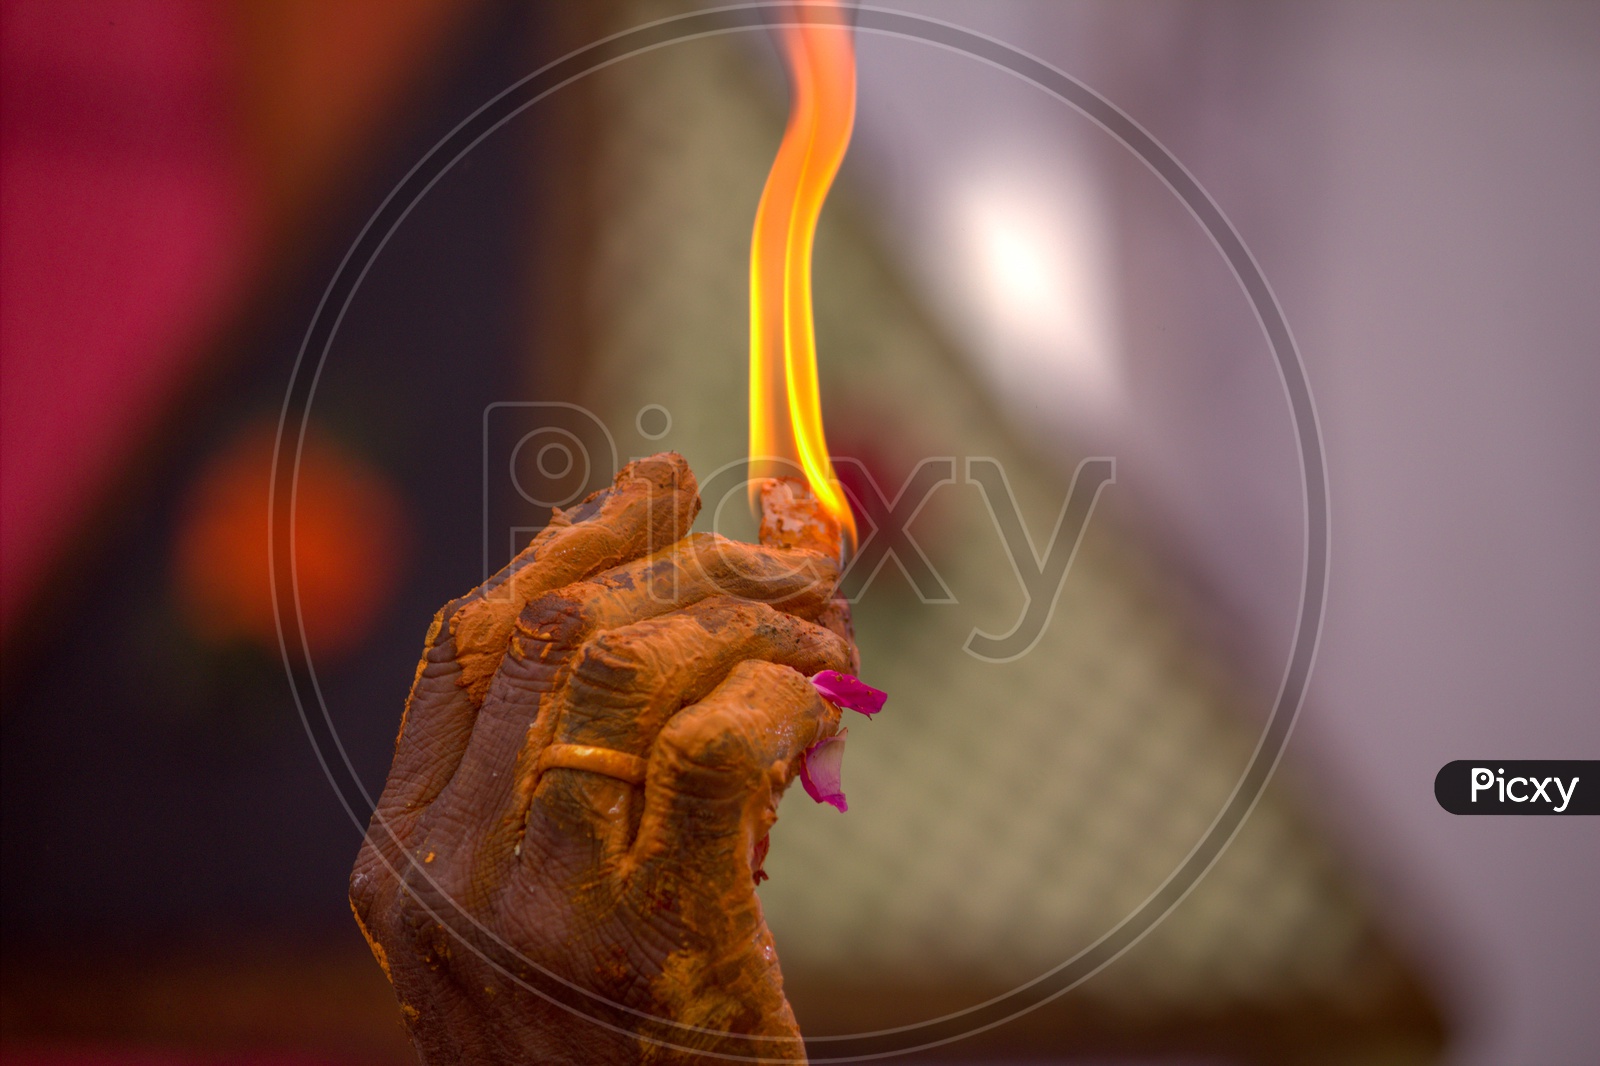 Fire in Hands in Ayyappa Swami Pooja